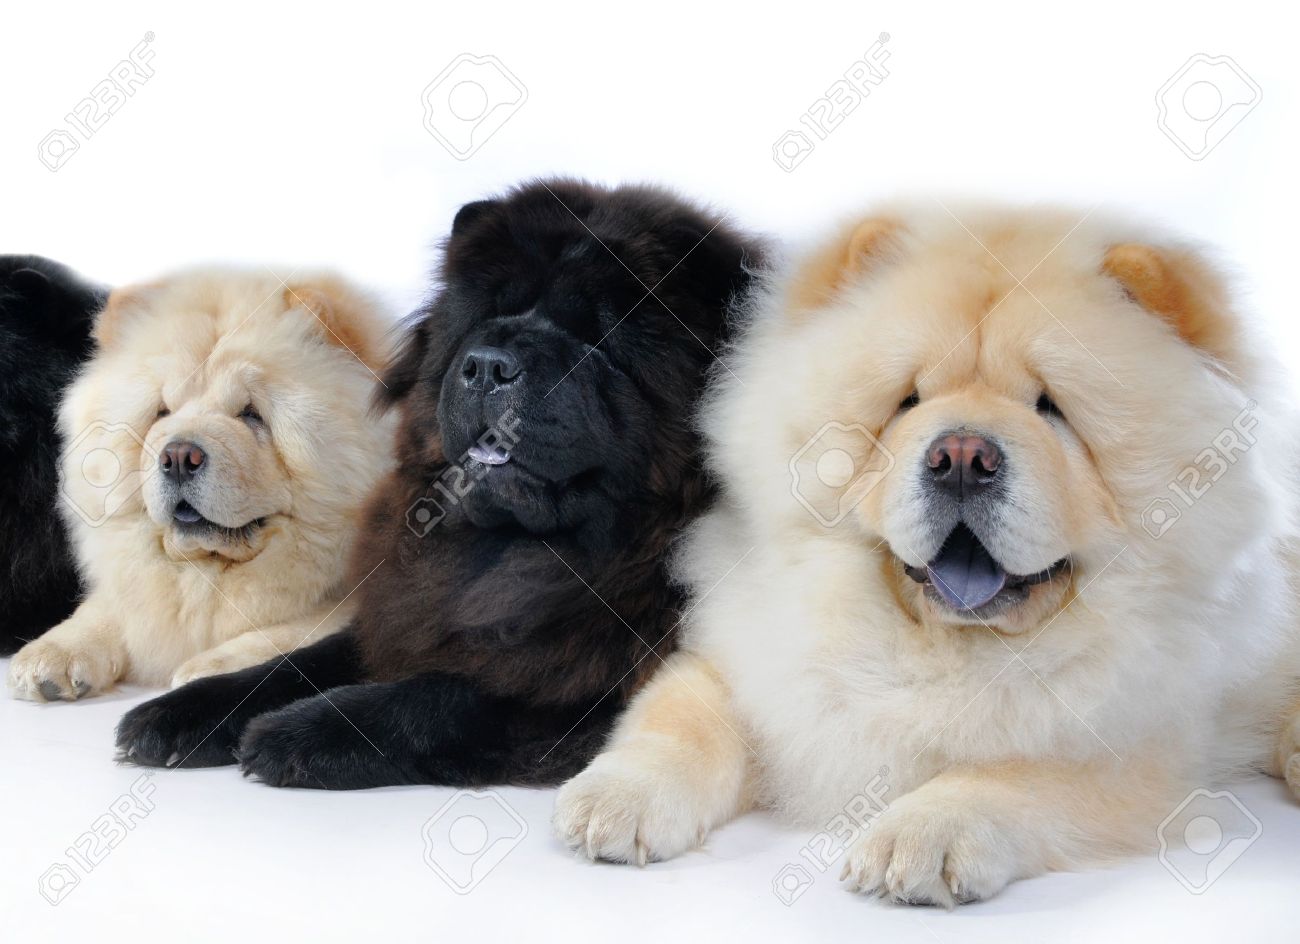 Black And White Chow Chow Dogs